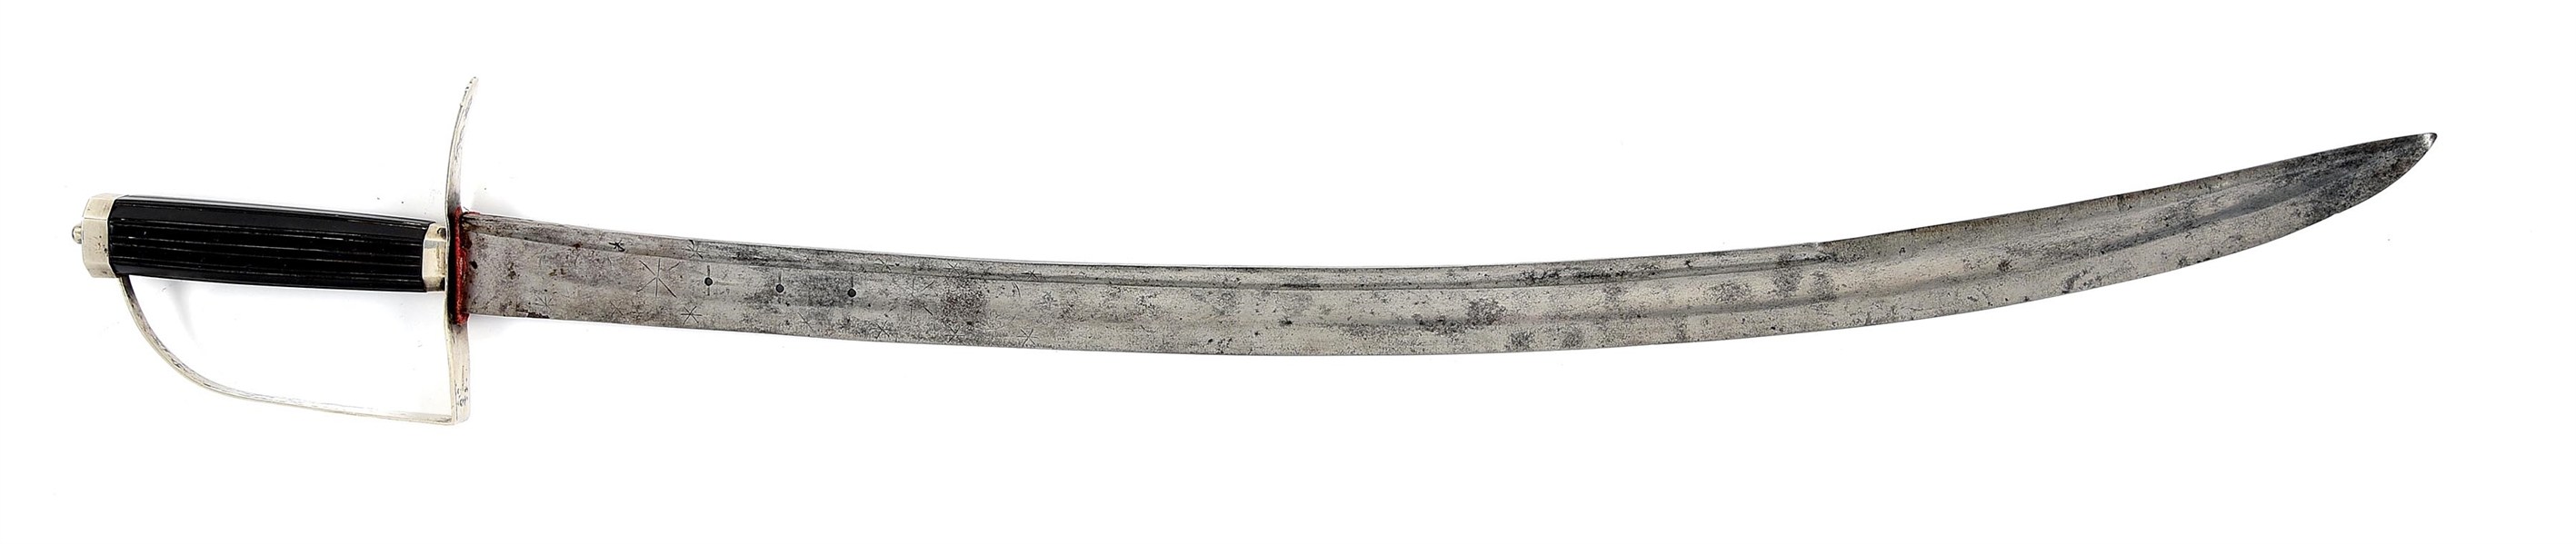 EARLY 19TH CENTURY JOHN LYNCH HALLMARKED SILVER HILTED SABER.